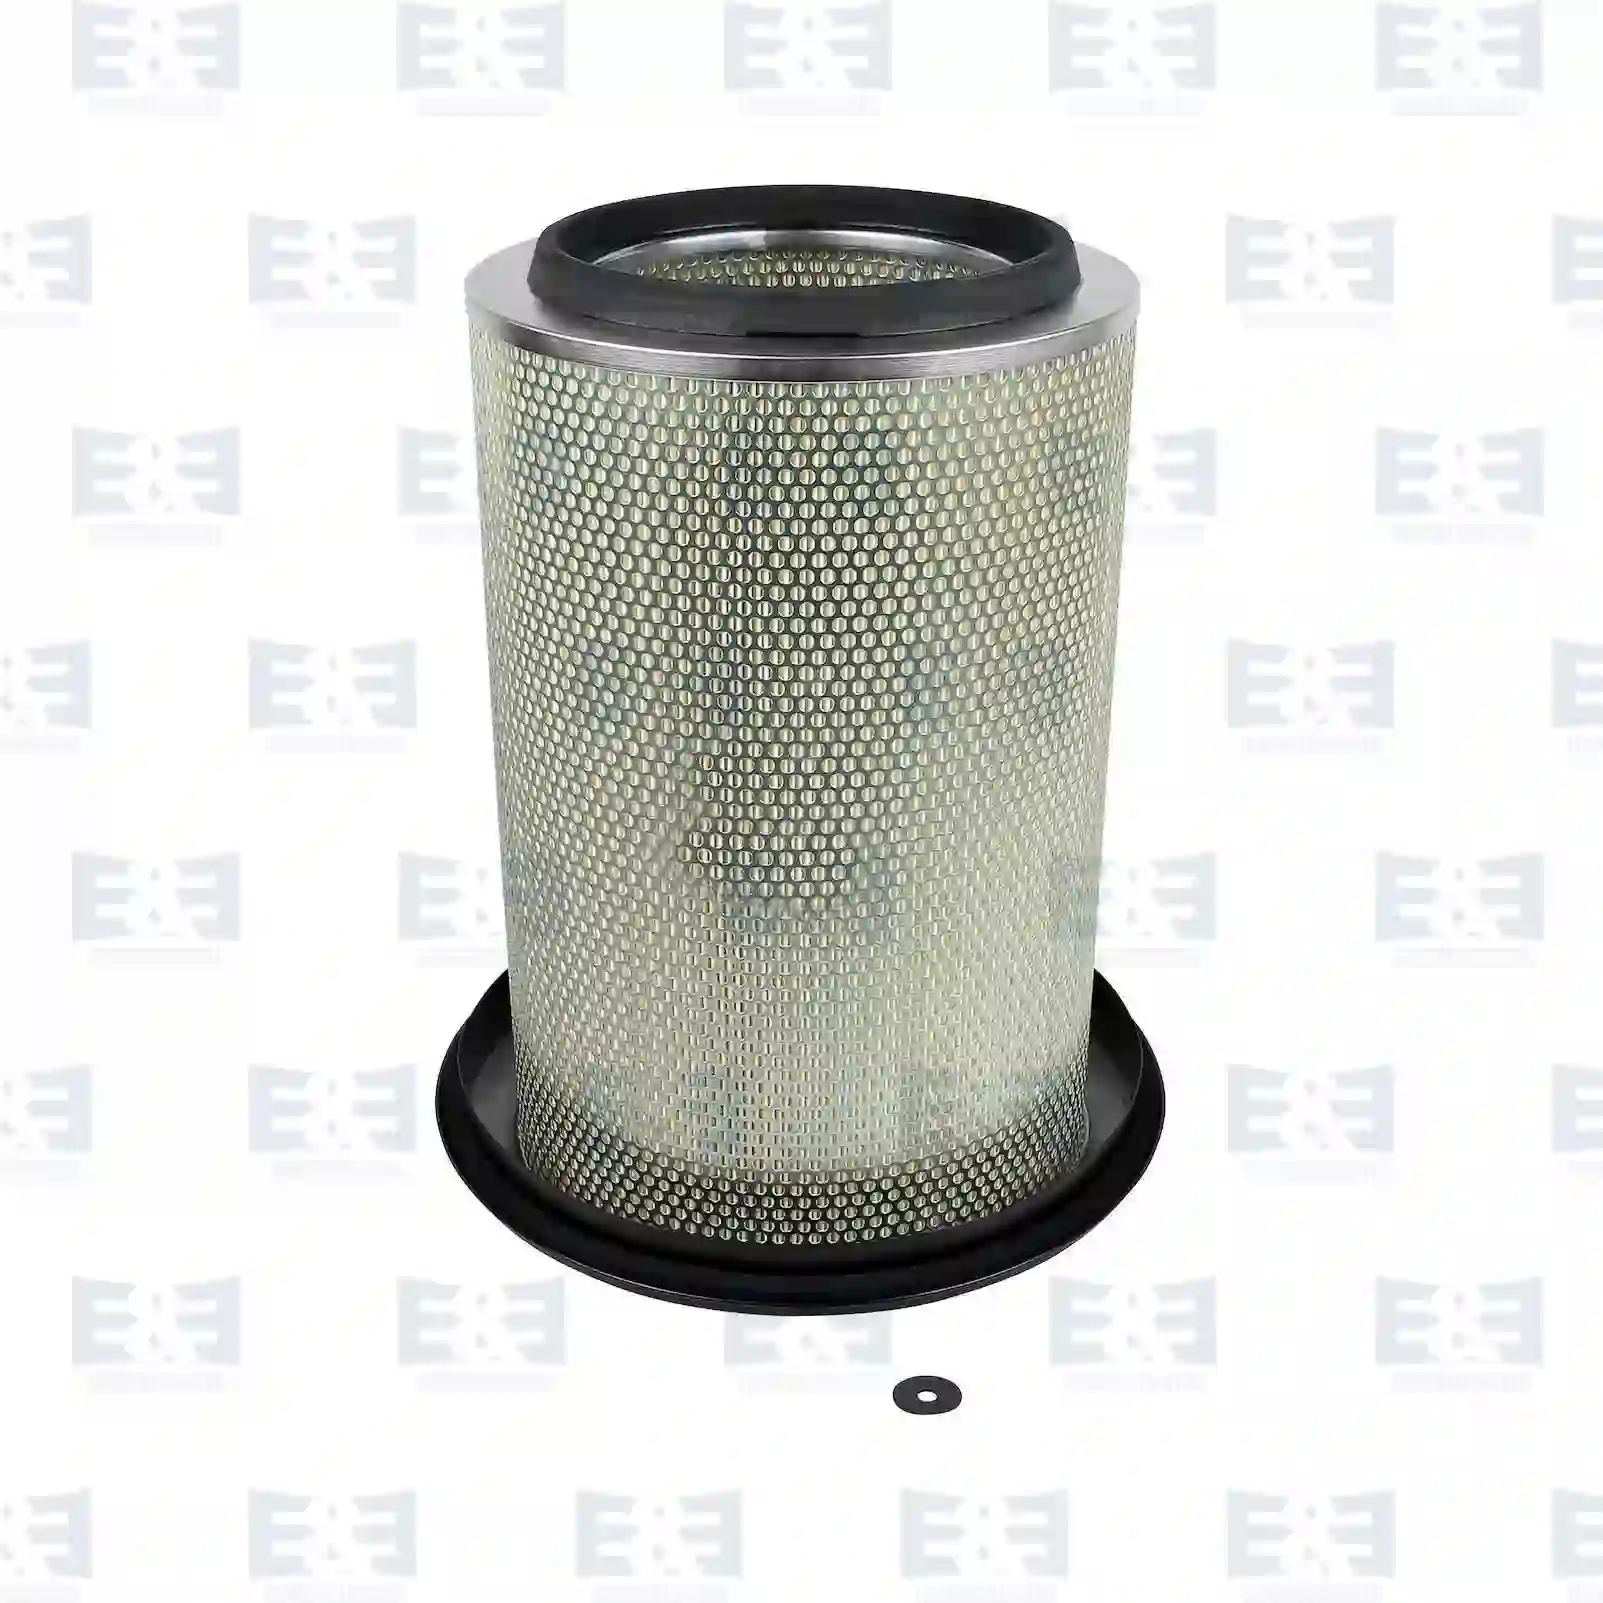  Air Filter Air filter, EE No 2E2204911 ,  oem no:104132, ABU8529, 4021806220, Y03727910, 5011333, 93152303, 4021806220, R1185, 250829, 261185, 309441, 3657297087, 370754, 965729, 1293400211, CH12264 E&E Truck Spare Parts | Truck Spare Parts, Auotomotive Spare Parts